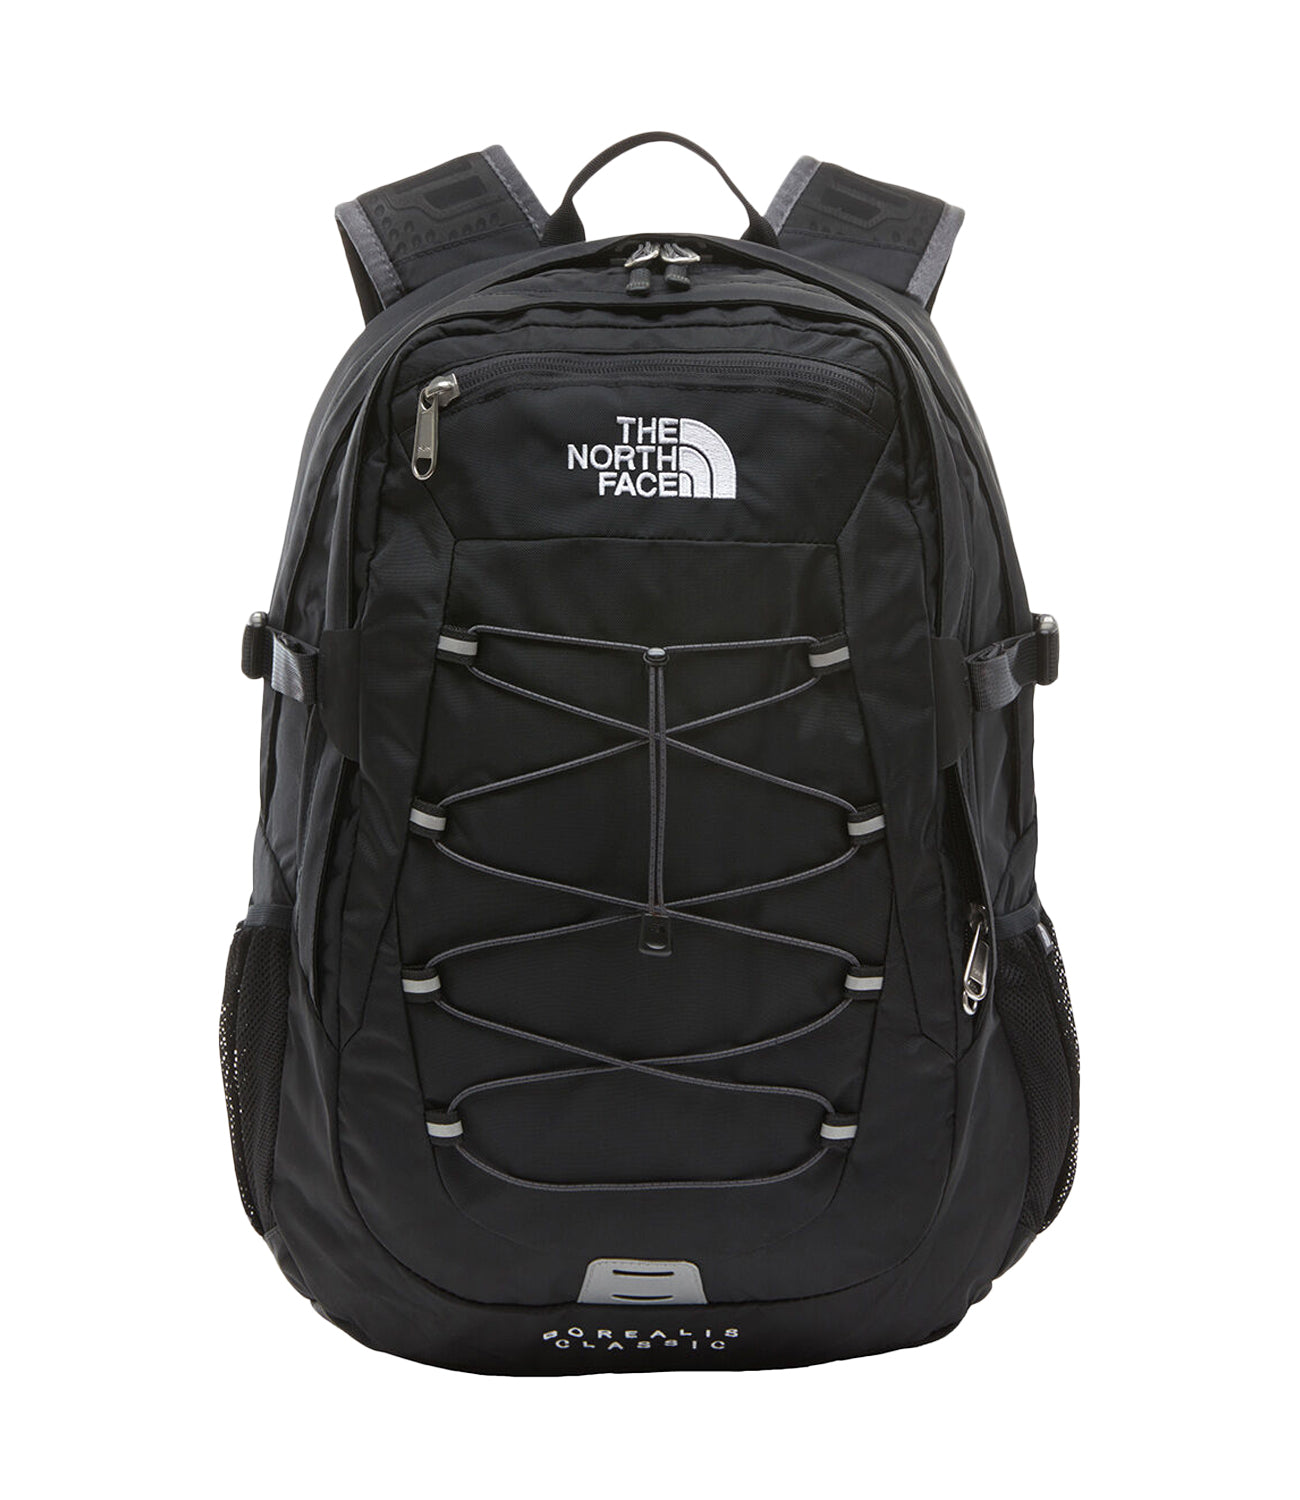 The North Face | Black Backpack